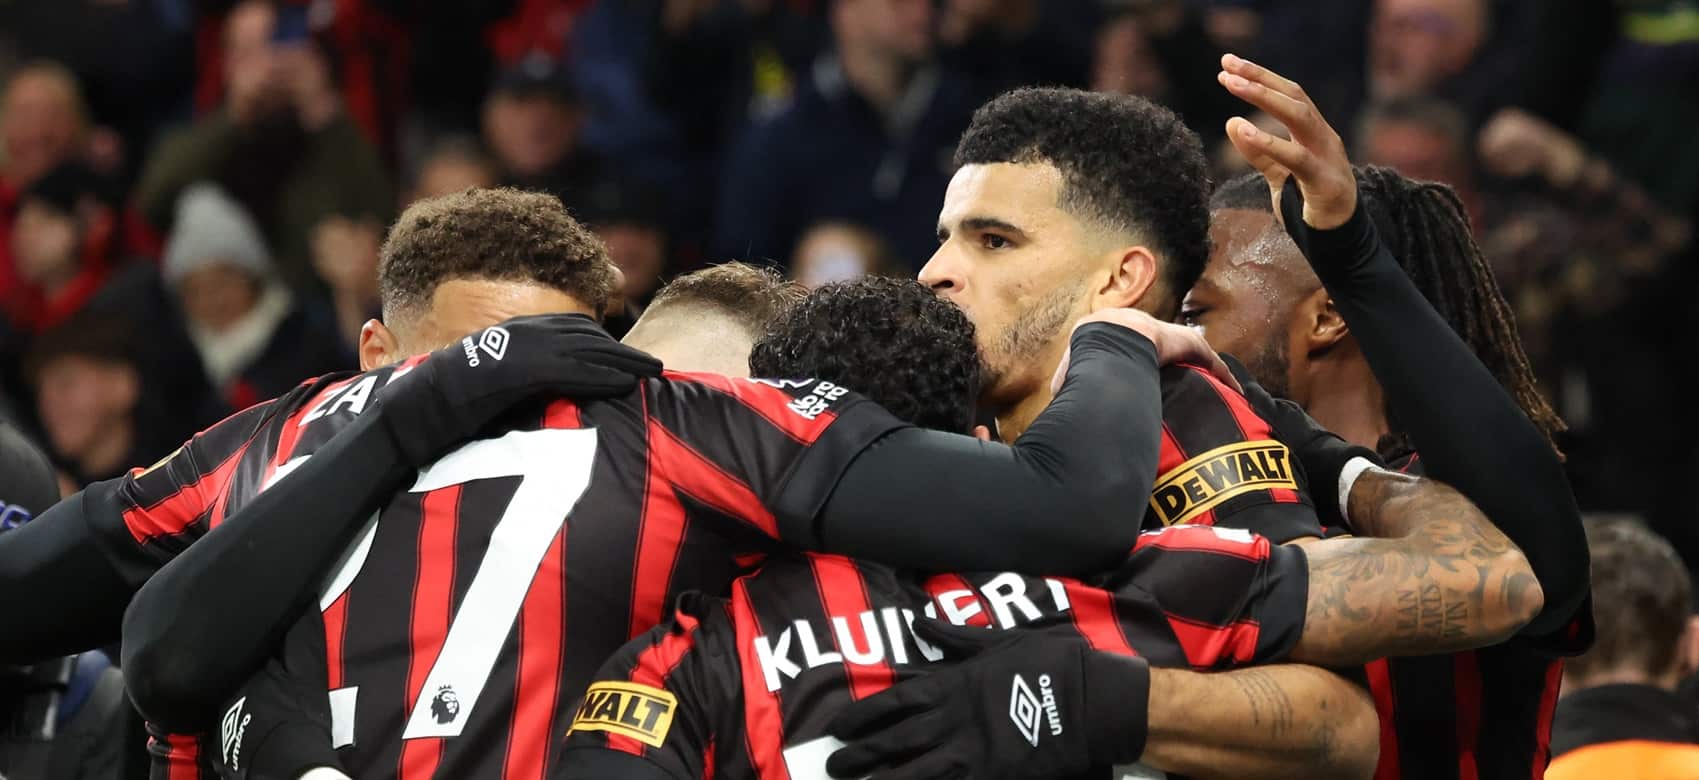 The Bournemouth players to buy in FPL: A fan's perspective 1